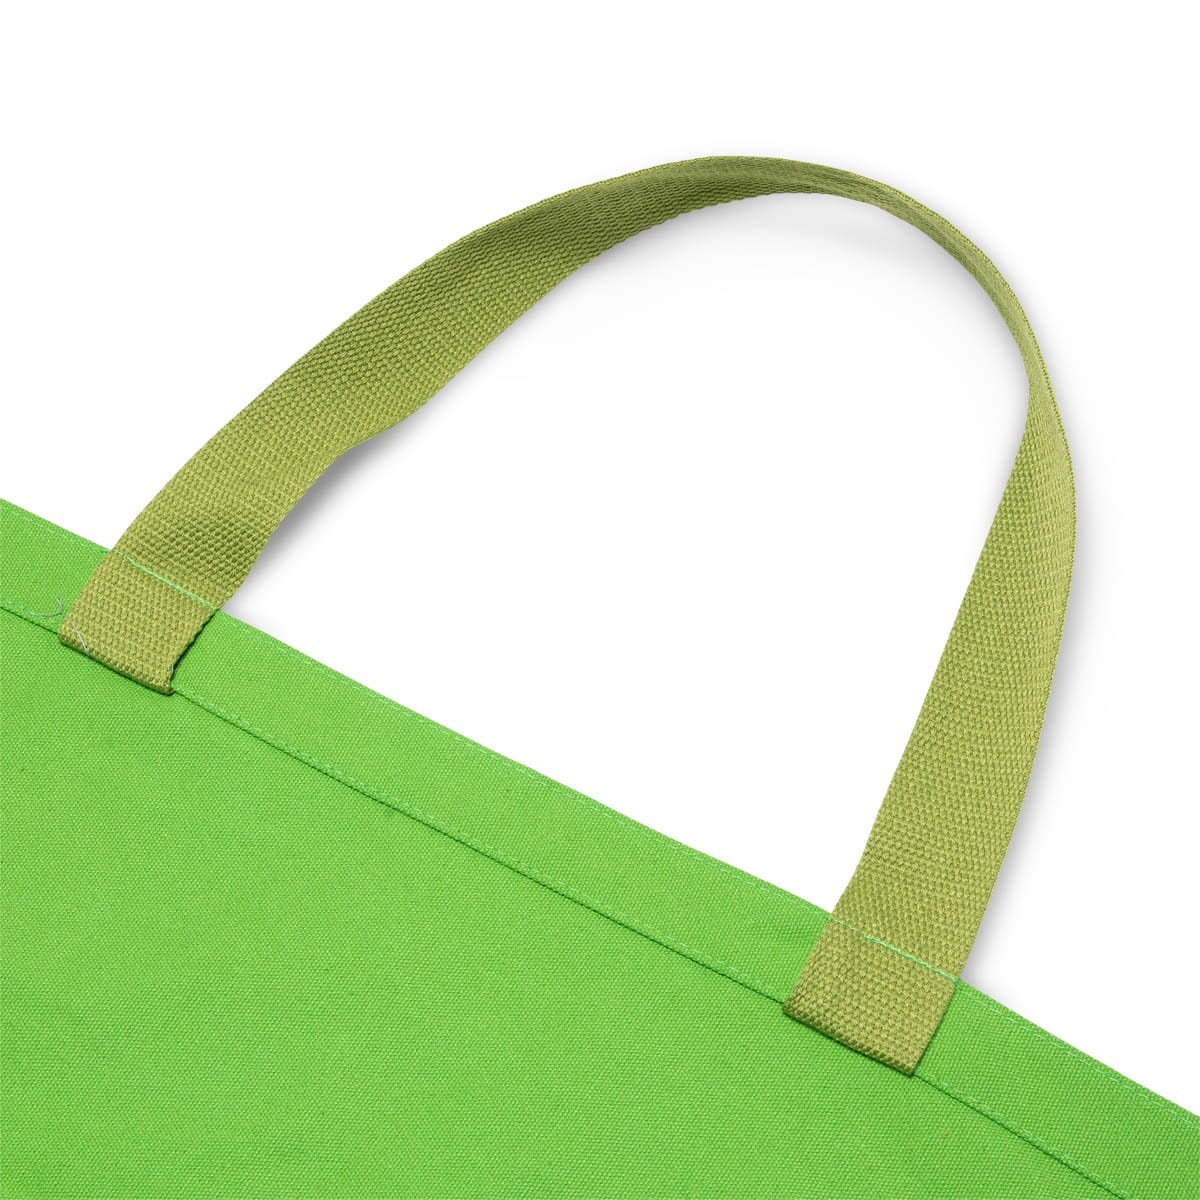 Mister Green Bags & Accessories GREEN / 20 IN. DIAMETER ROUND TOTE / GROW POT